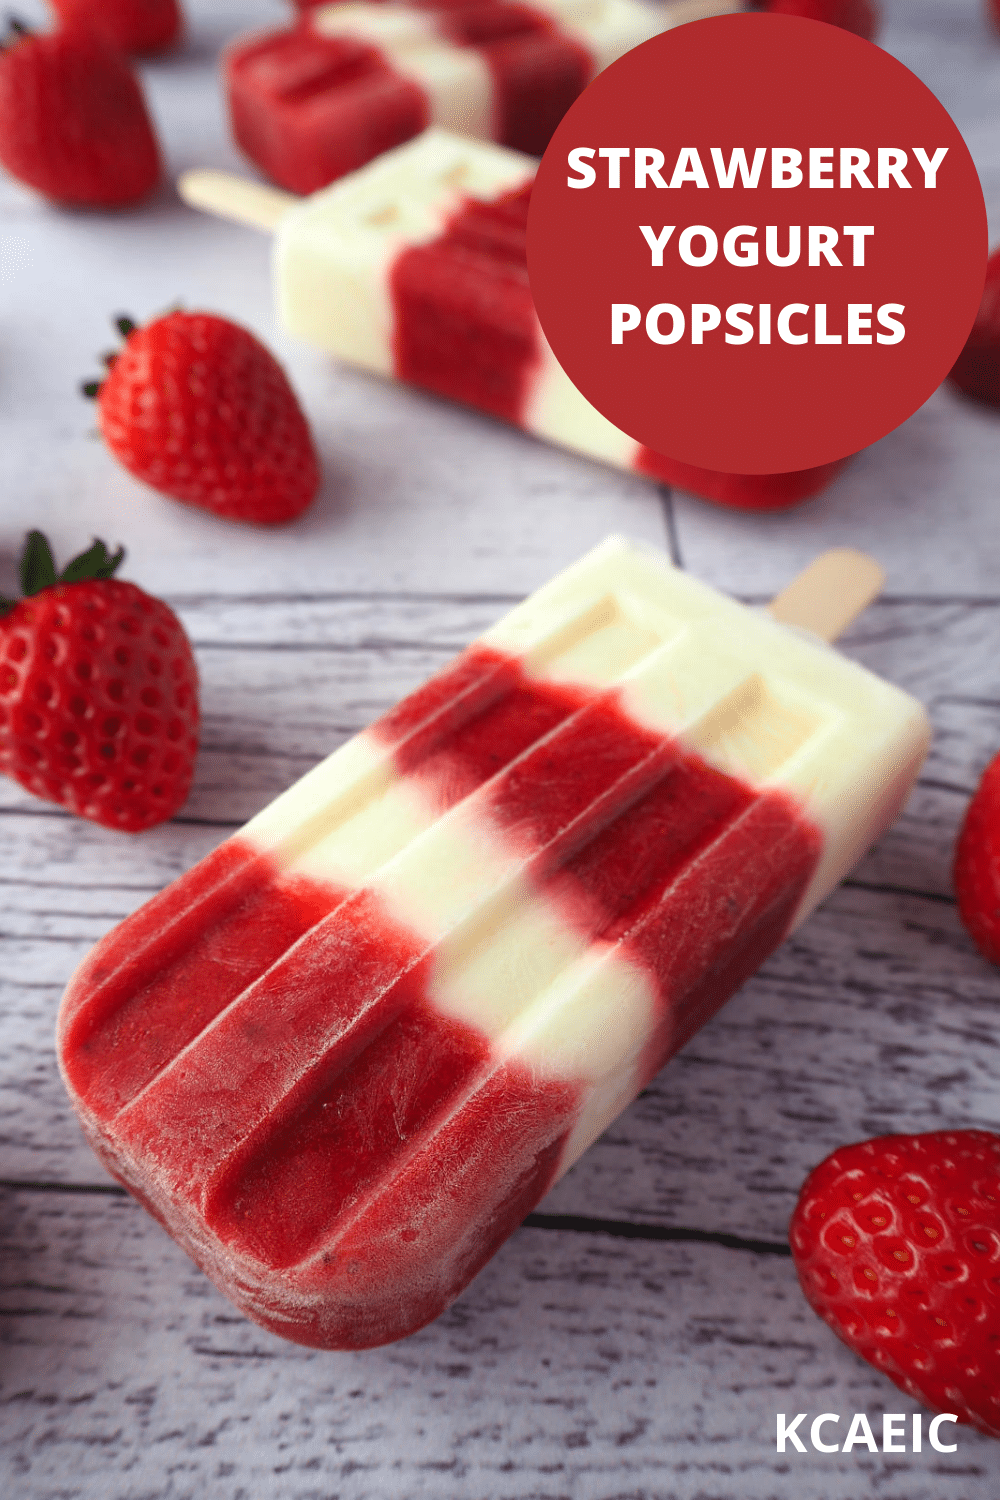 Close up strawberry yogurt popsicles on a diagonal surrounded by fresh strawberries with text overlay, strawberry yogurt popsicles, KCAEIC.